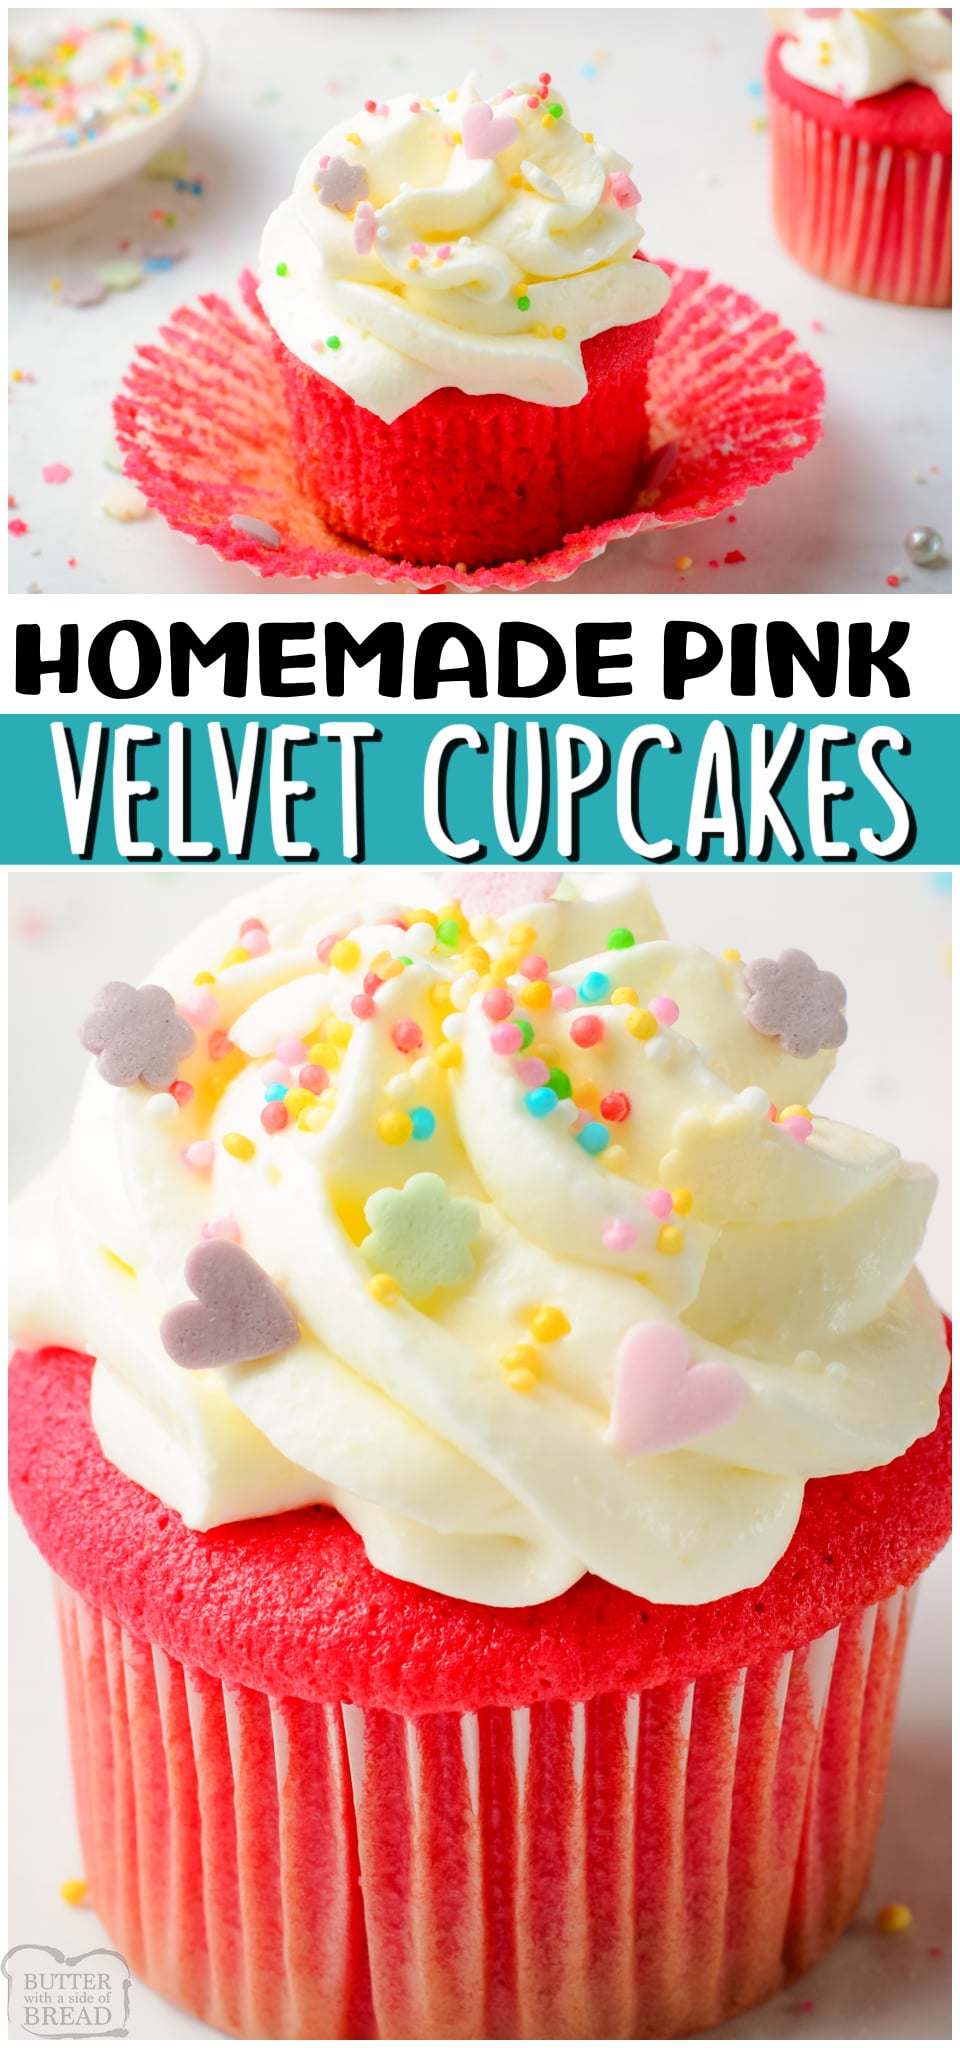 Homemade Pink Velvet Cupcakes are the PERFECT pink cupcakes. Moist, tender cupcakes made from scratch, then colored in a vibrant pink, then topped with a fluffy cream cheese frosting!